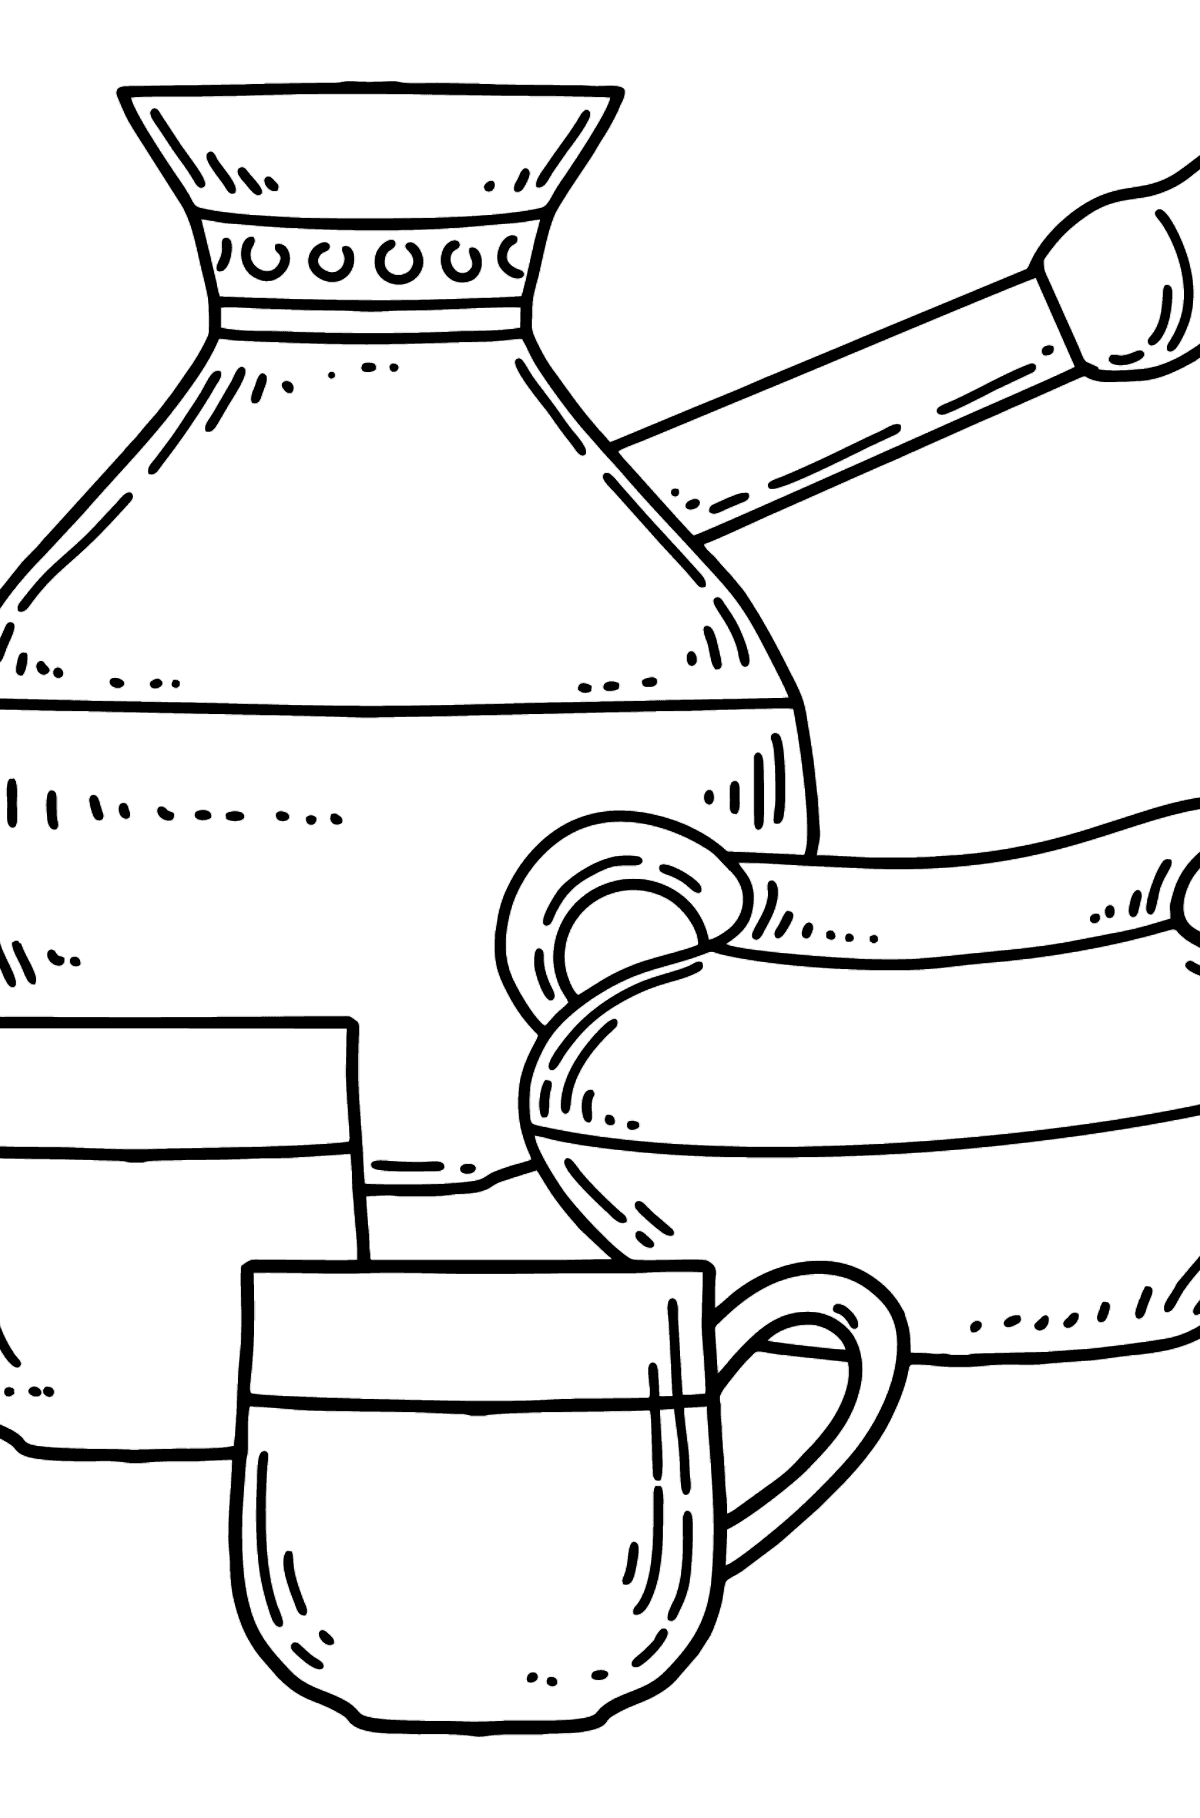 Turkish Coffee coloring page - Coloring Pages for Kids